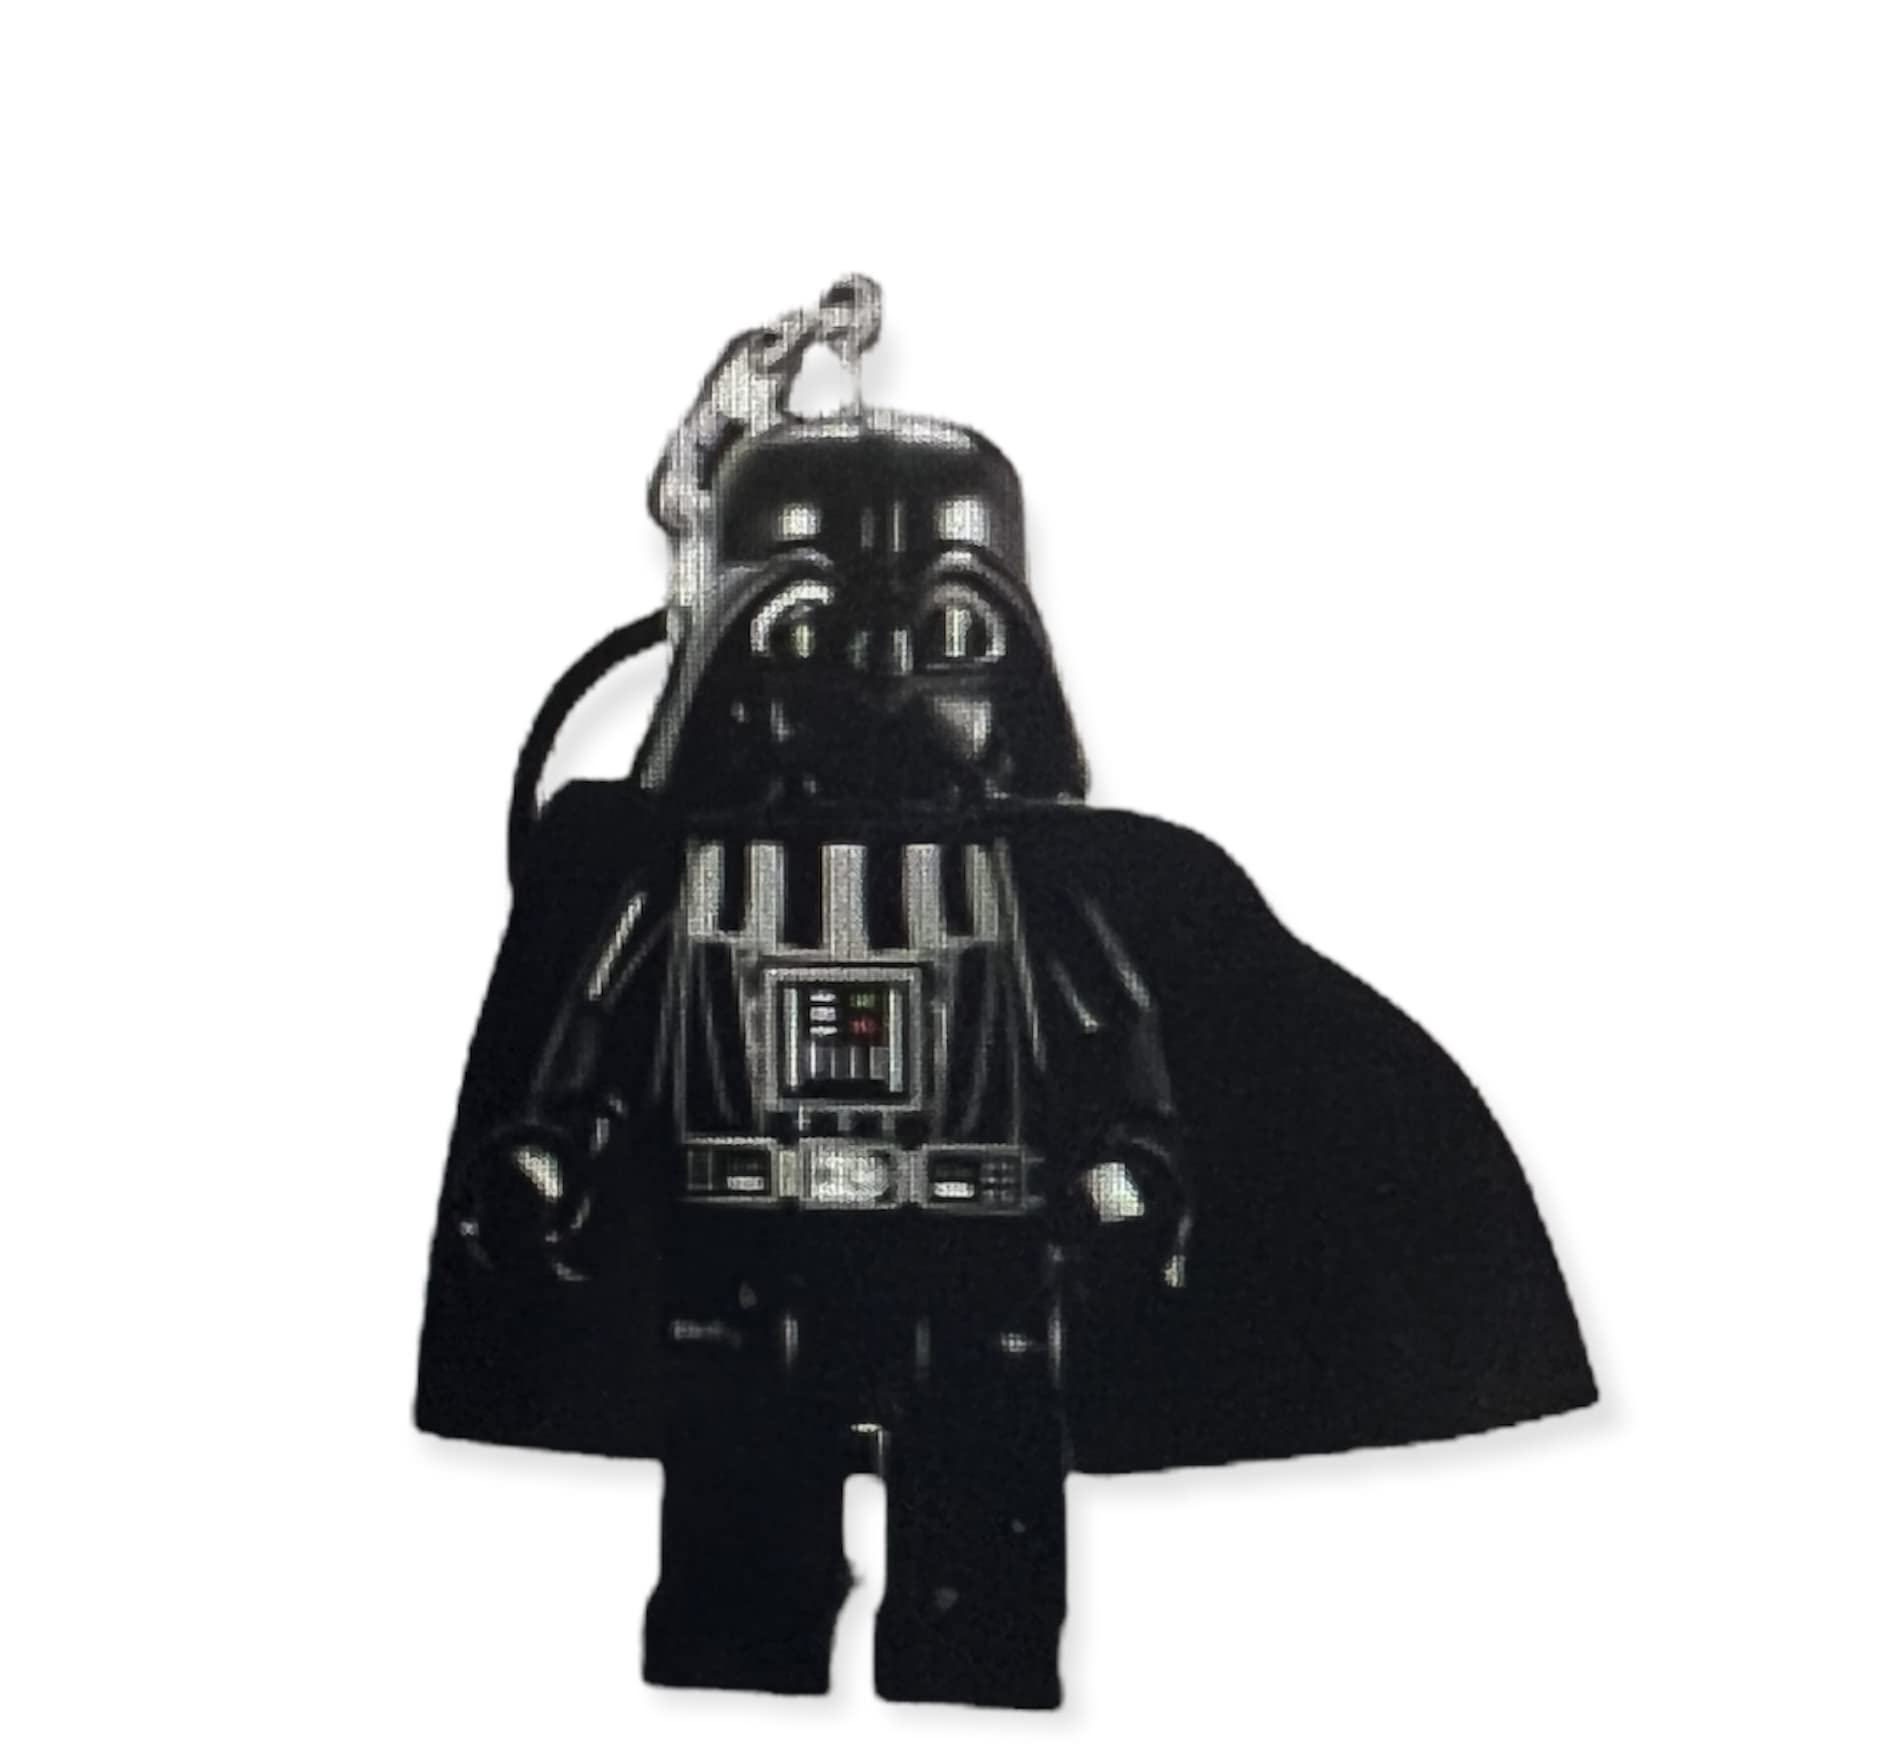 LEGO Star Wars Darth Vader Key Chain $5 + Free Shipping w/ Prime or on $35+